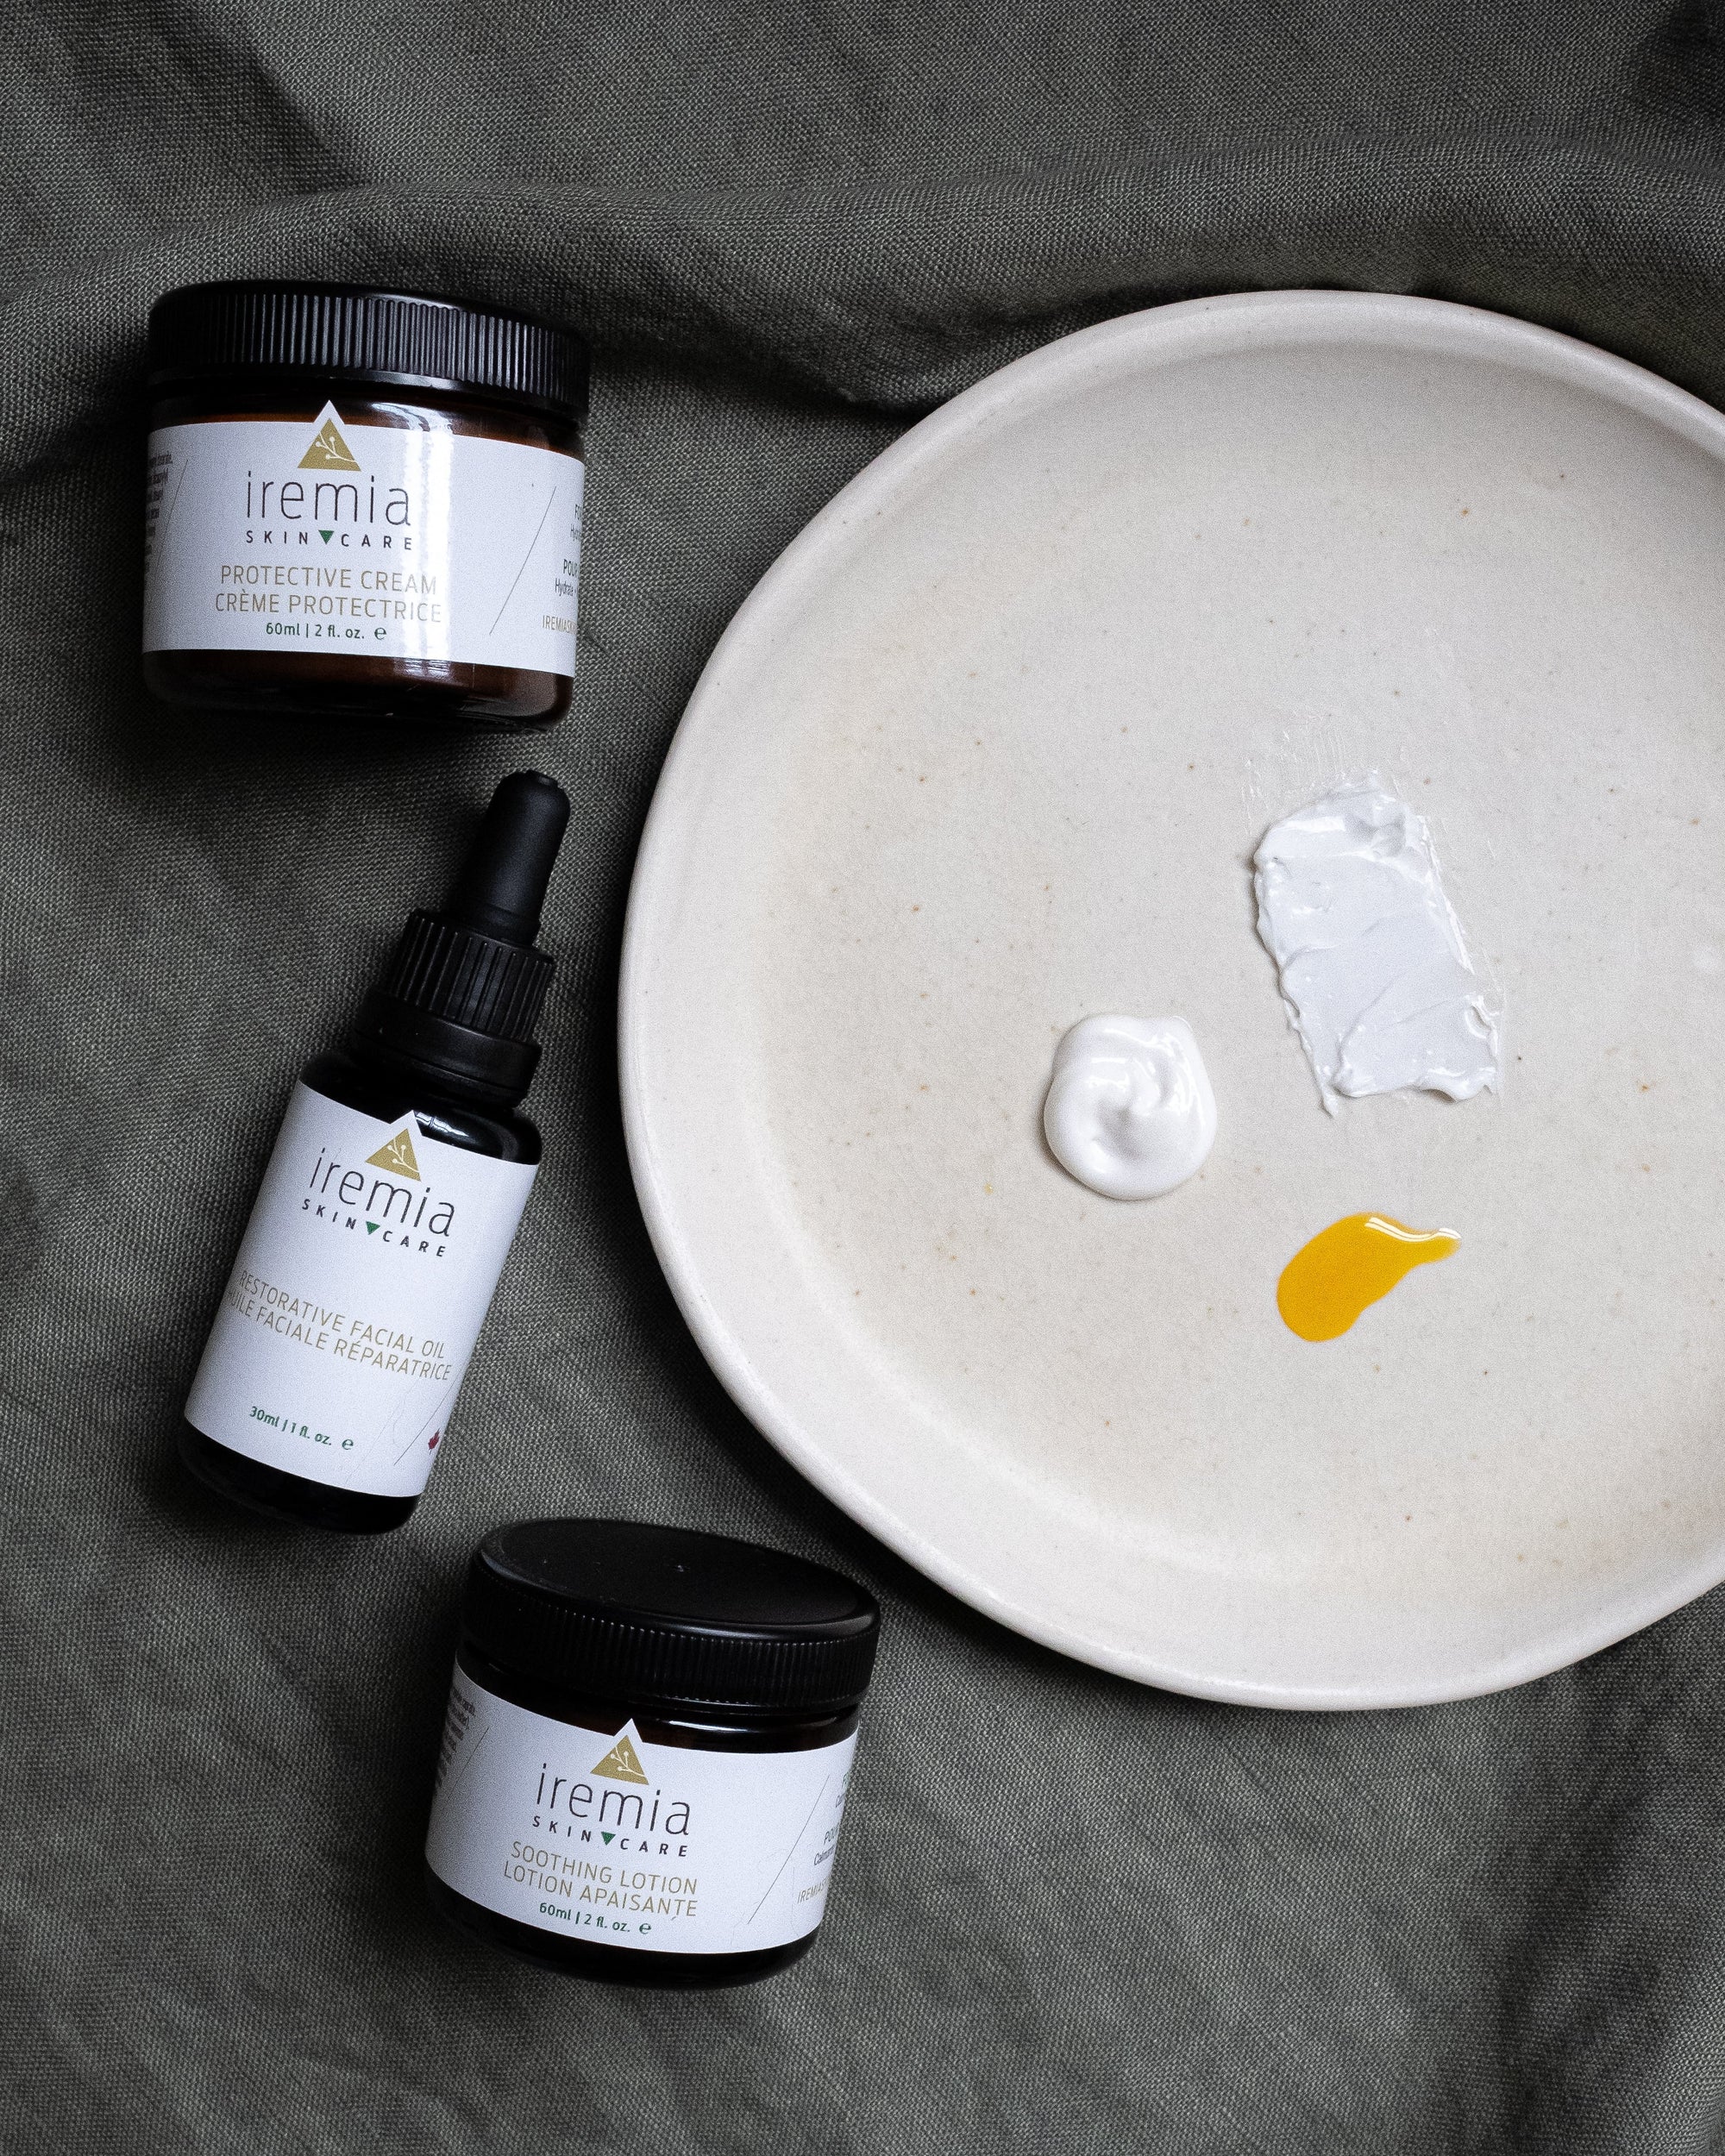 Iremia Skincare's Soothing Lotion, Restorative Facial Oil and Protective Cream are position on the left of the image next to a neutral plate which shows the textures of the products. 